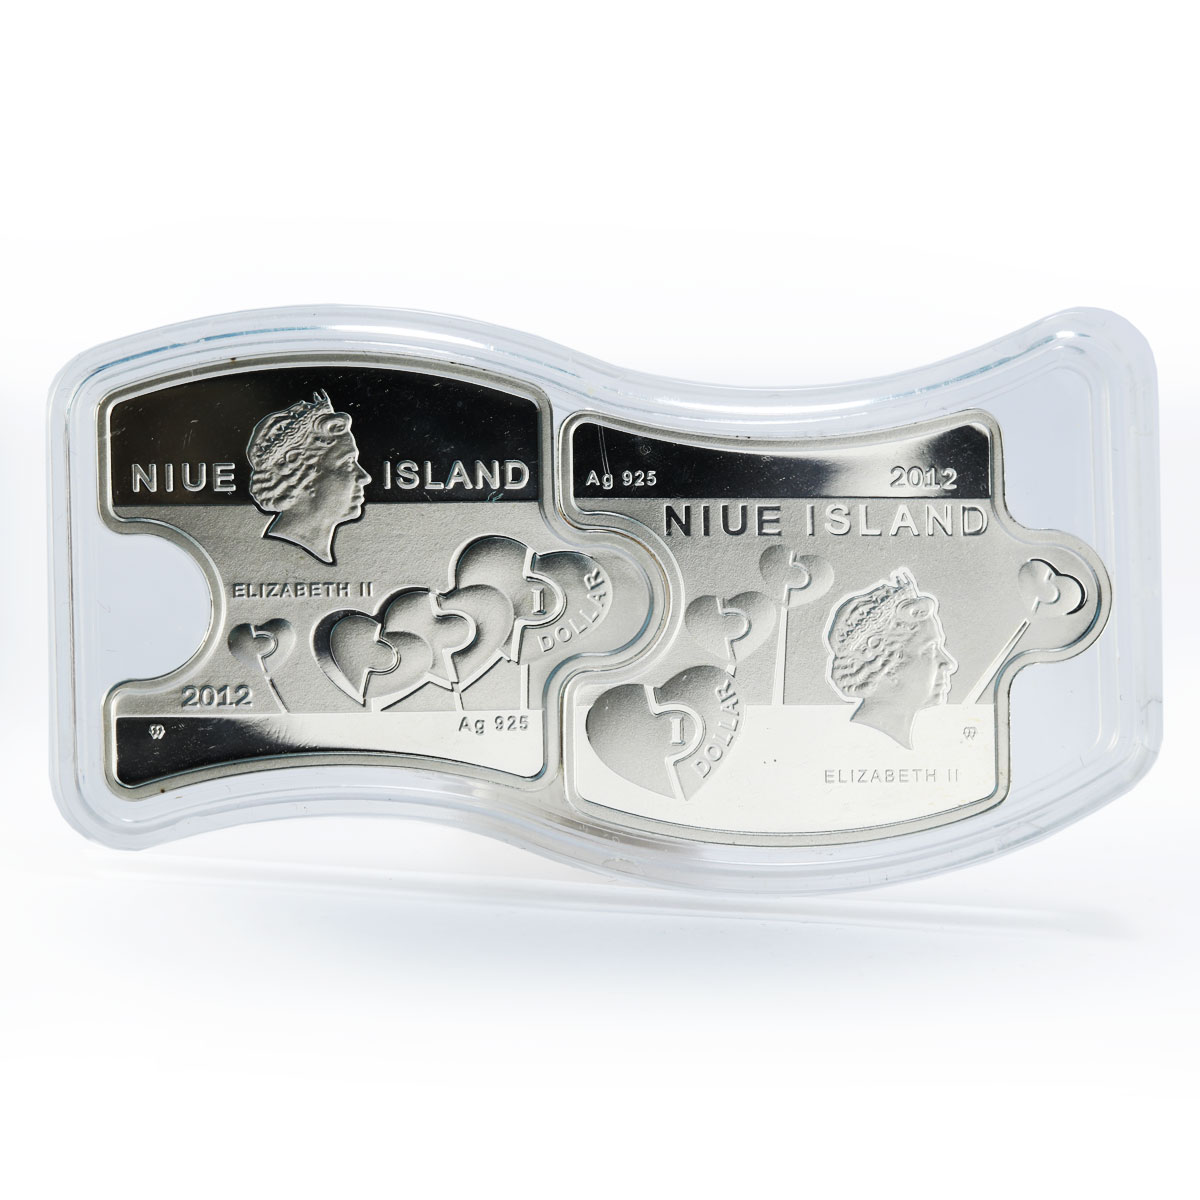 Niue set of 2 coins You and Me birds silver crystals 2012